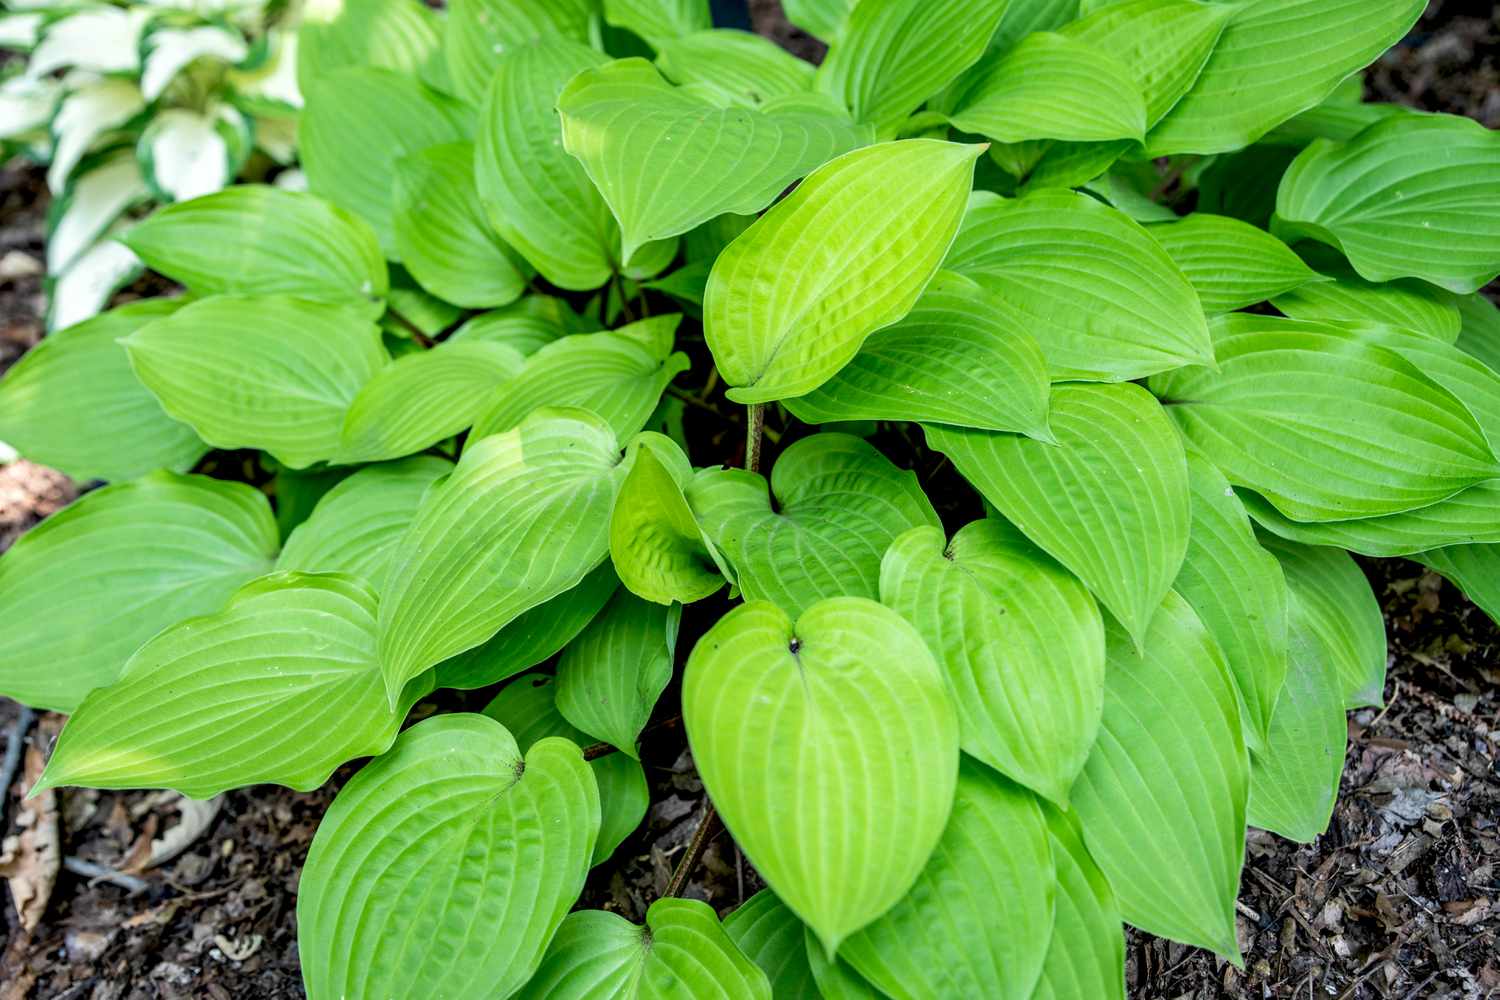 Fire island hosta plant with bright green rain drop-shaped leaves